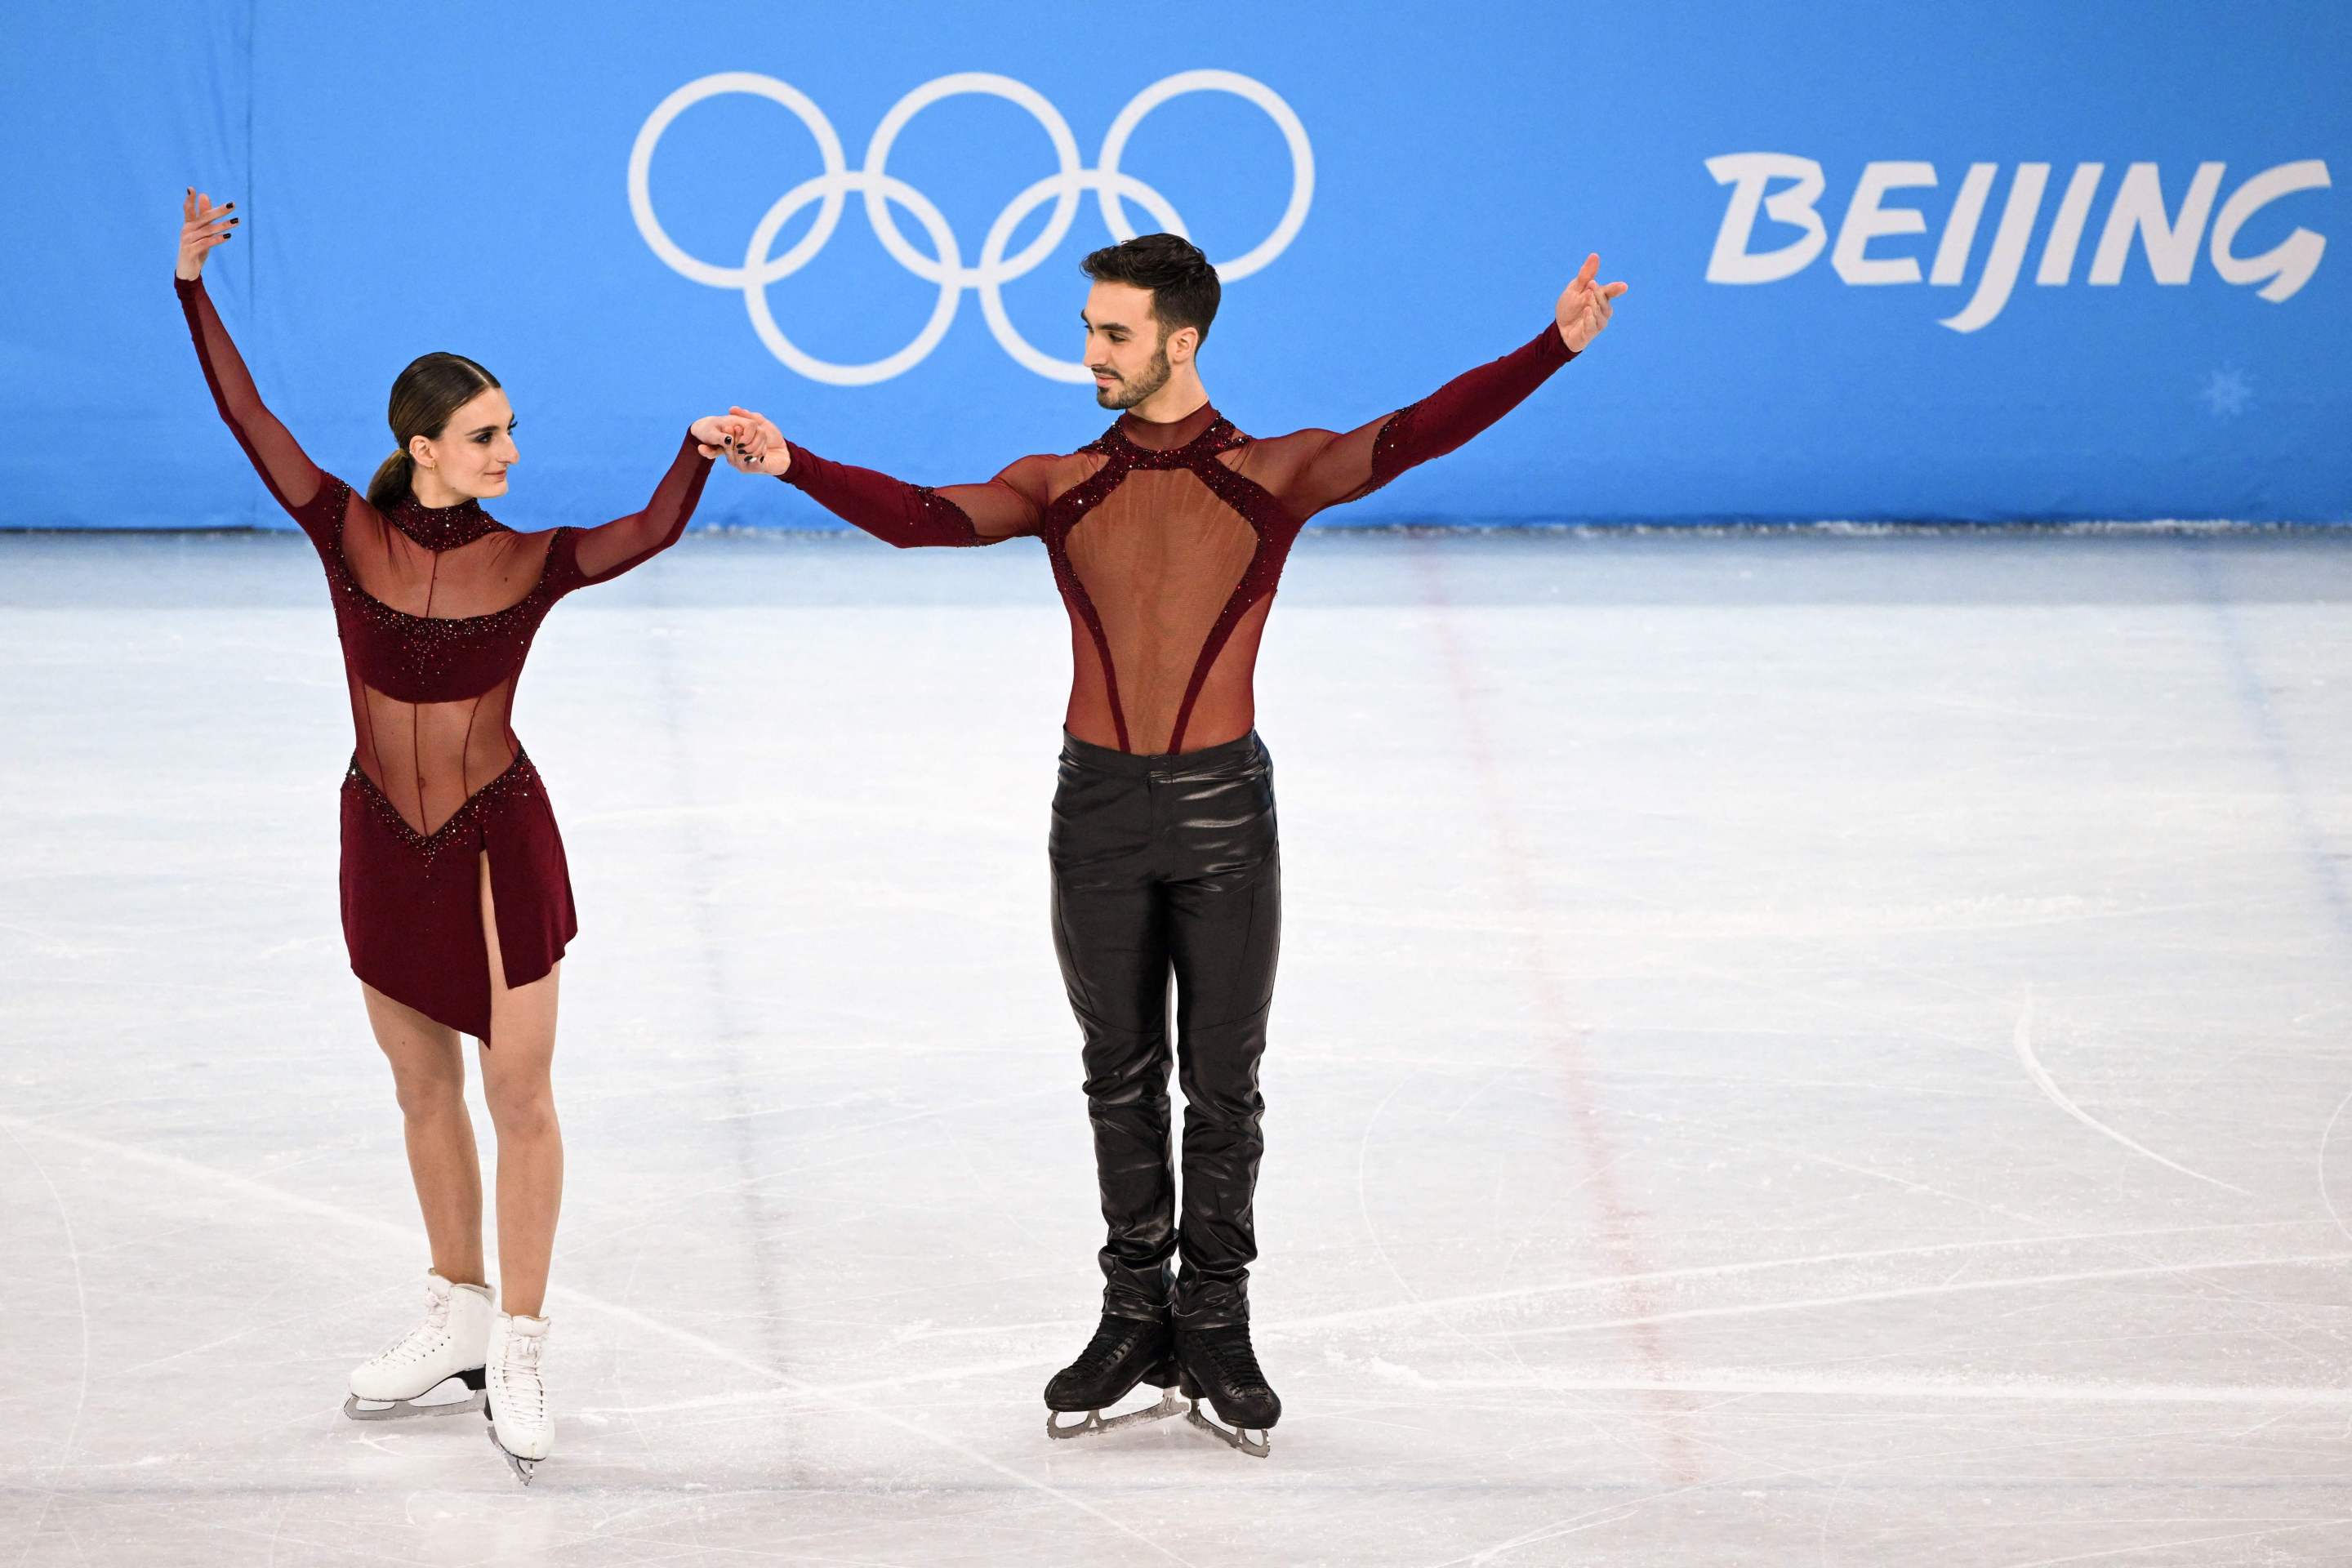 riella Papadakis and Guillaume Cizeron of Team France skate during the Ice Dance Rhythm Dance on day eight of the Beijing 2022 Winter Olympic Games at Capital Indoor Stadium on February 12, 2022 in Beijing, China.